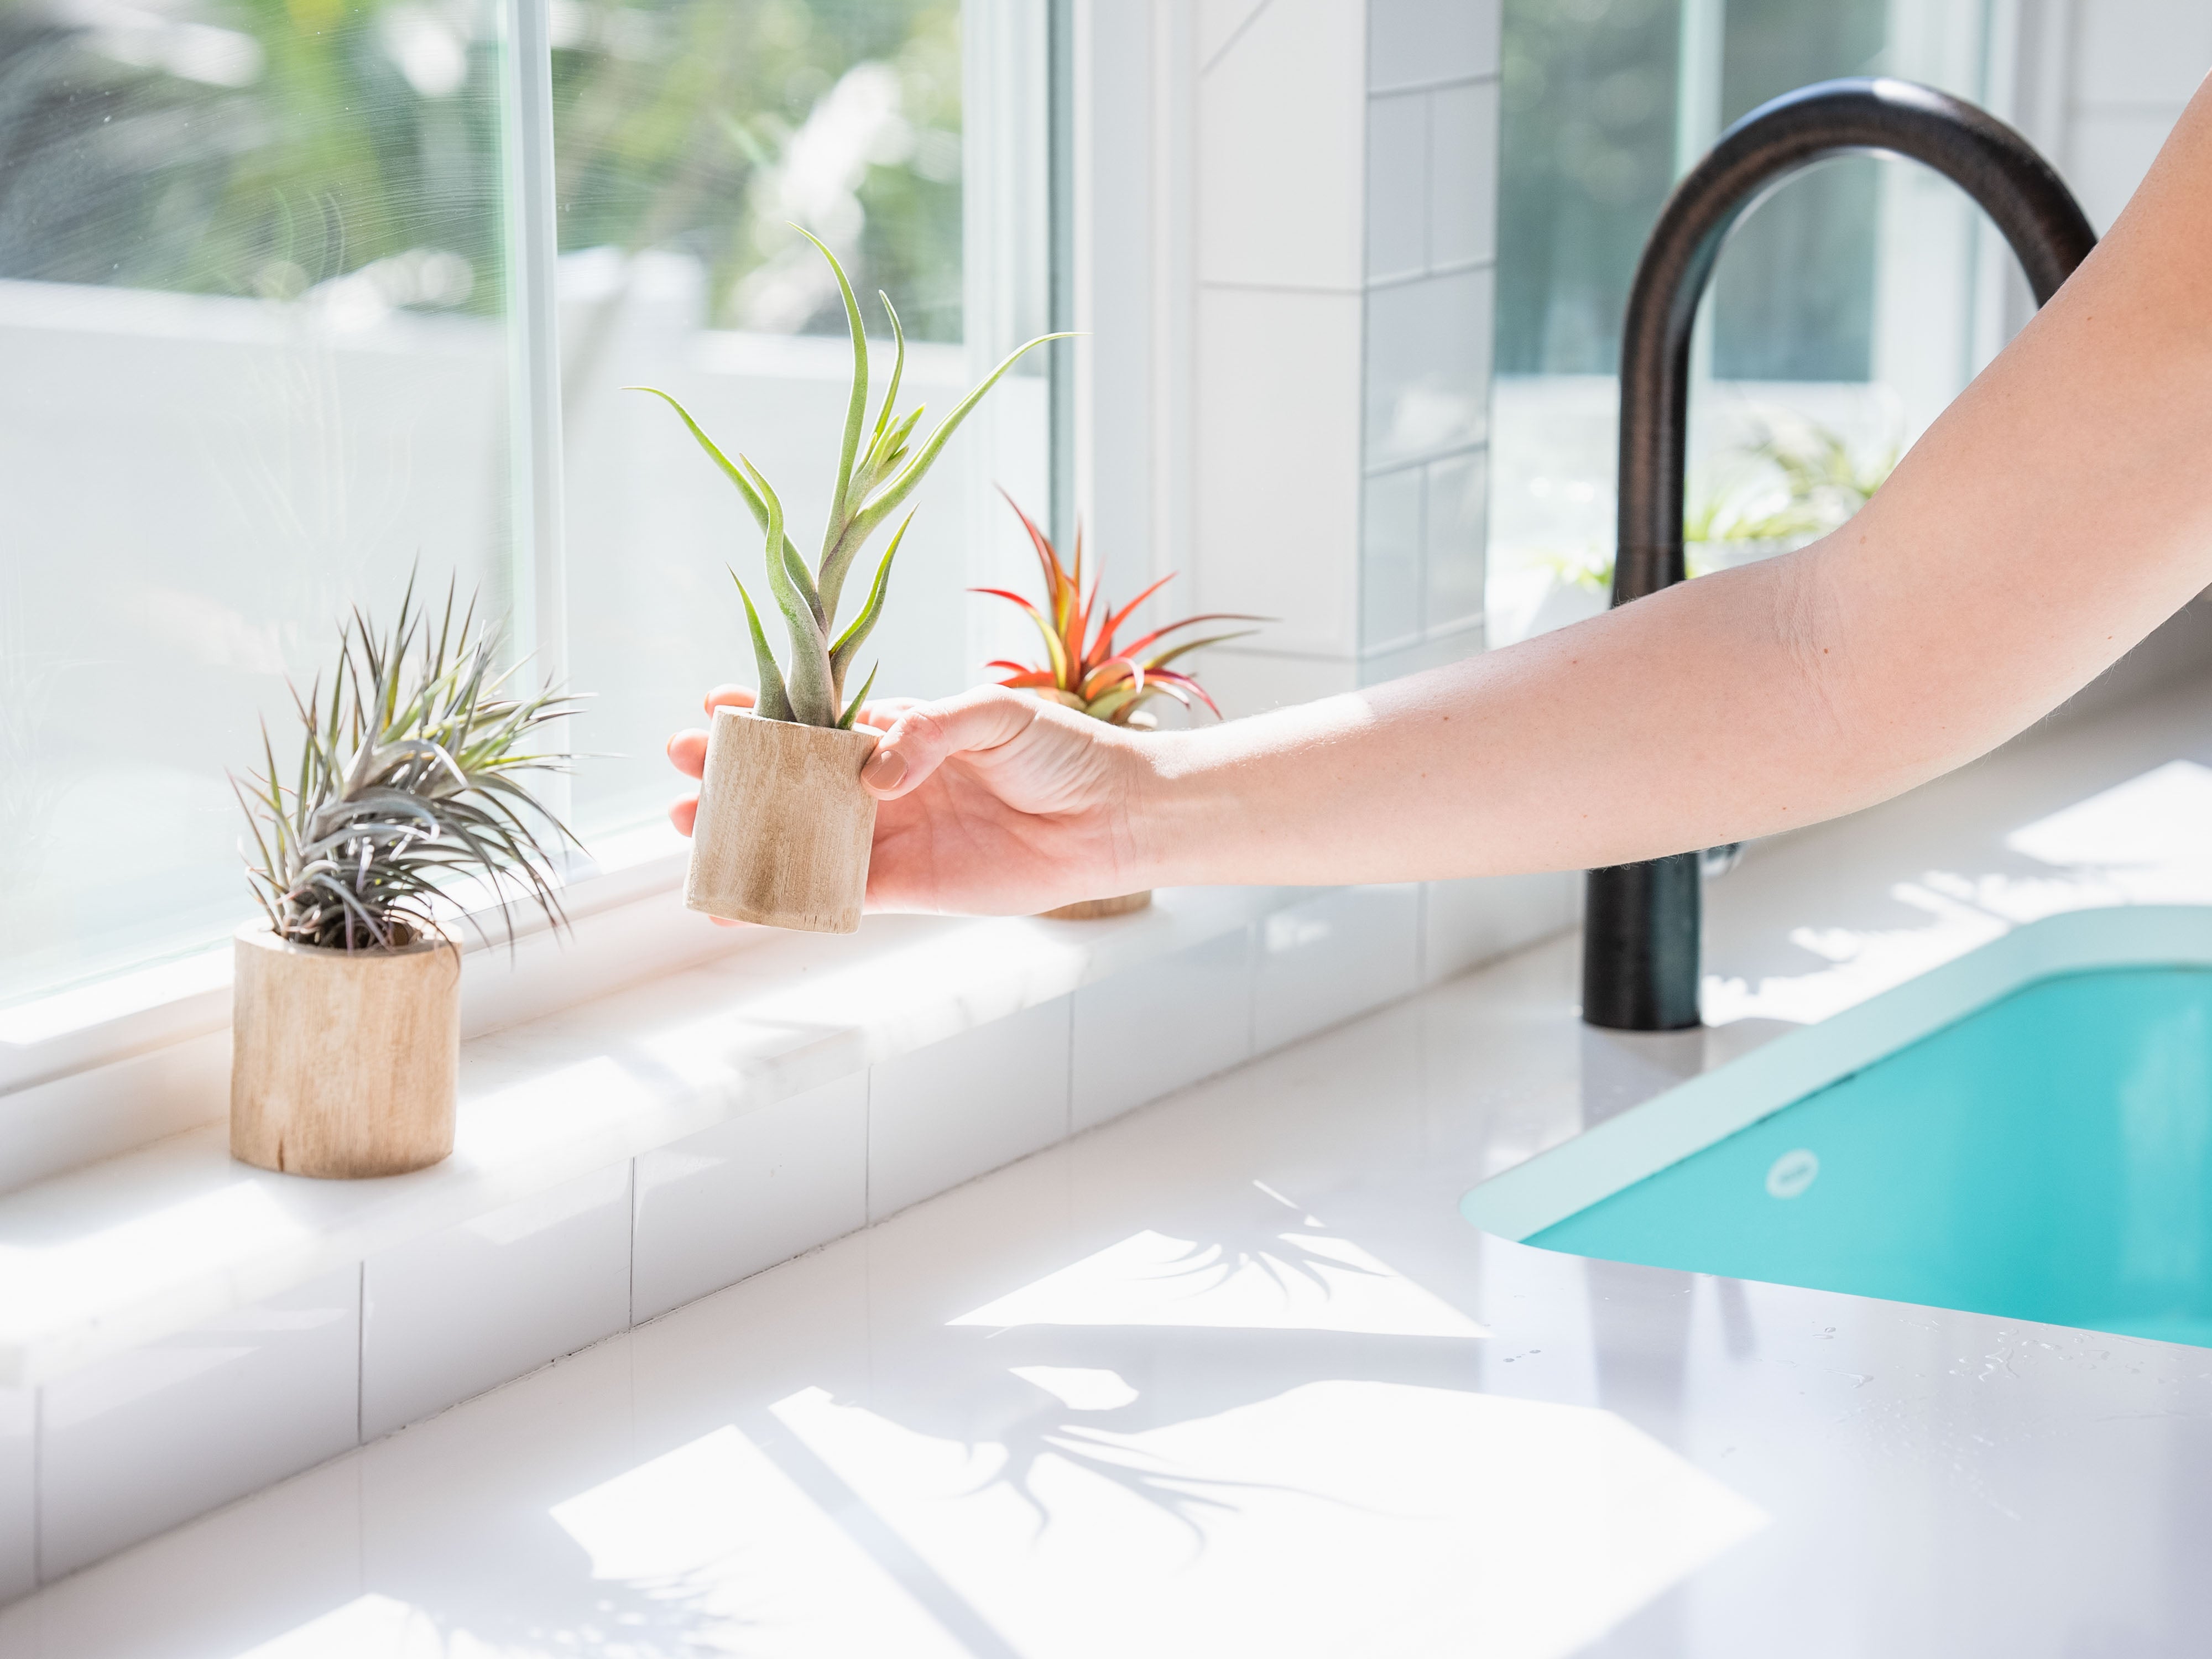 10 Bathroom Plants That Absorb Moisture and Freshen Up the Air